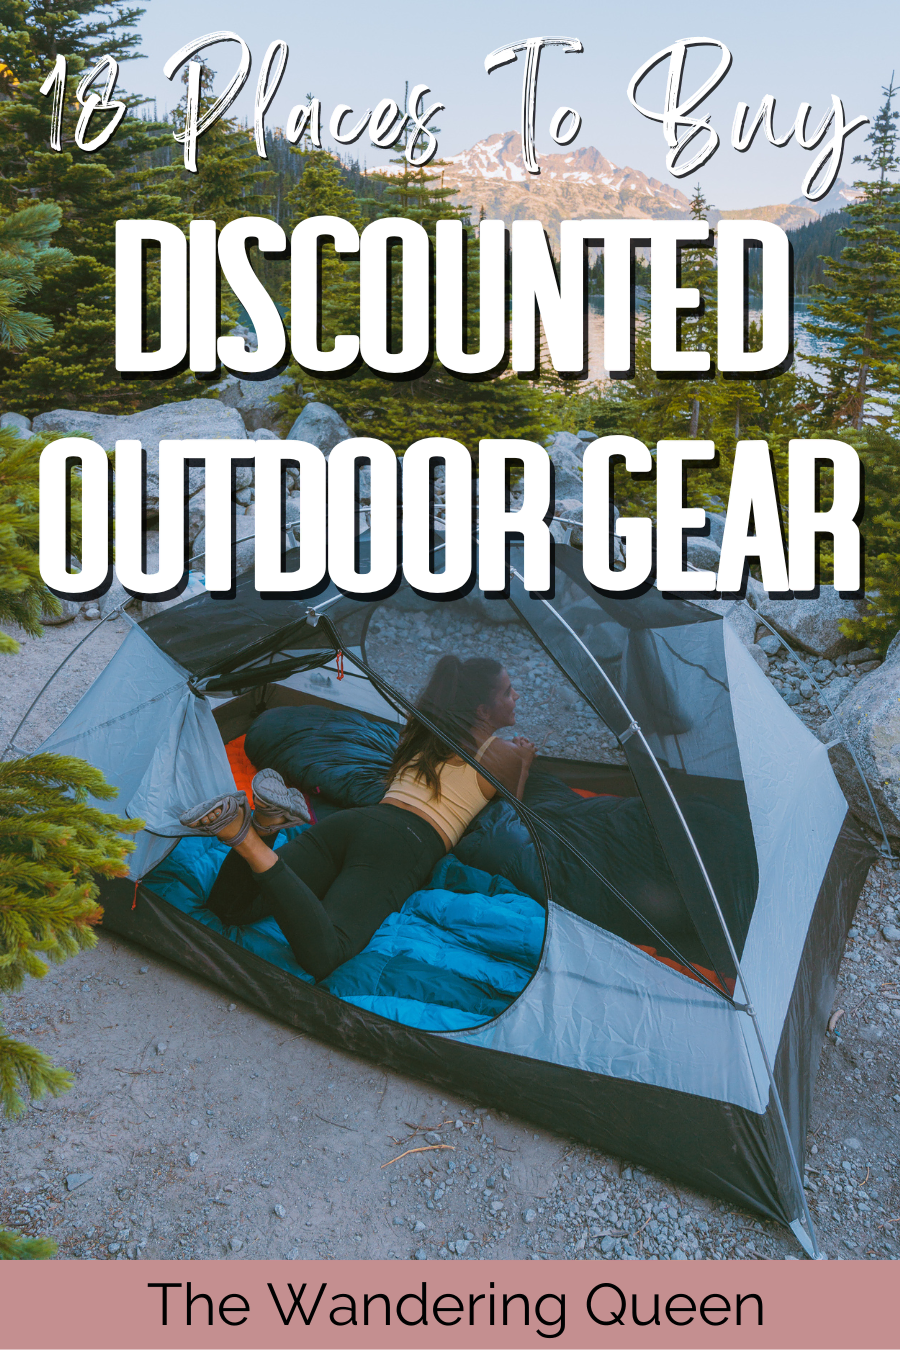 Outdoor Gear Promotions